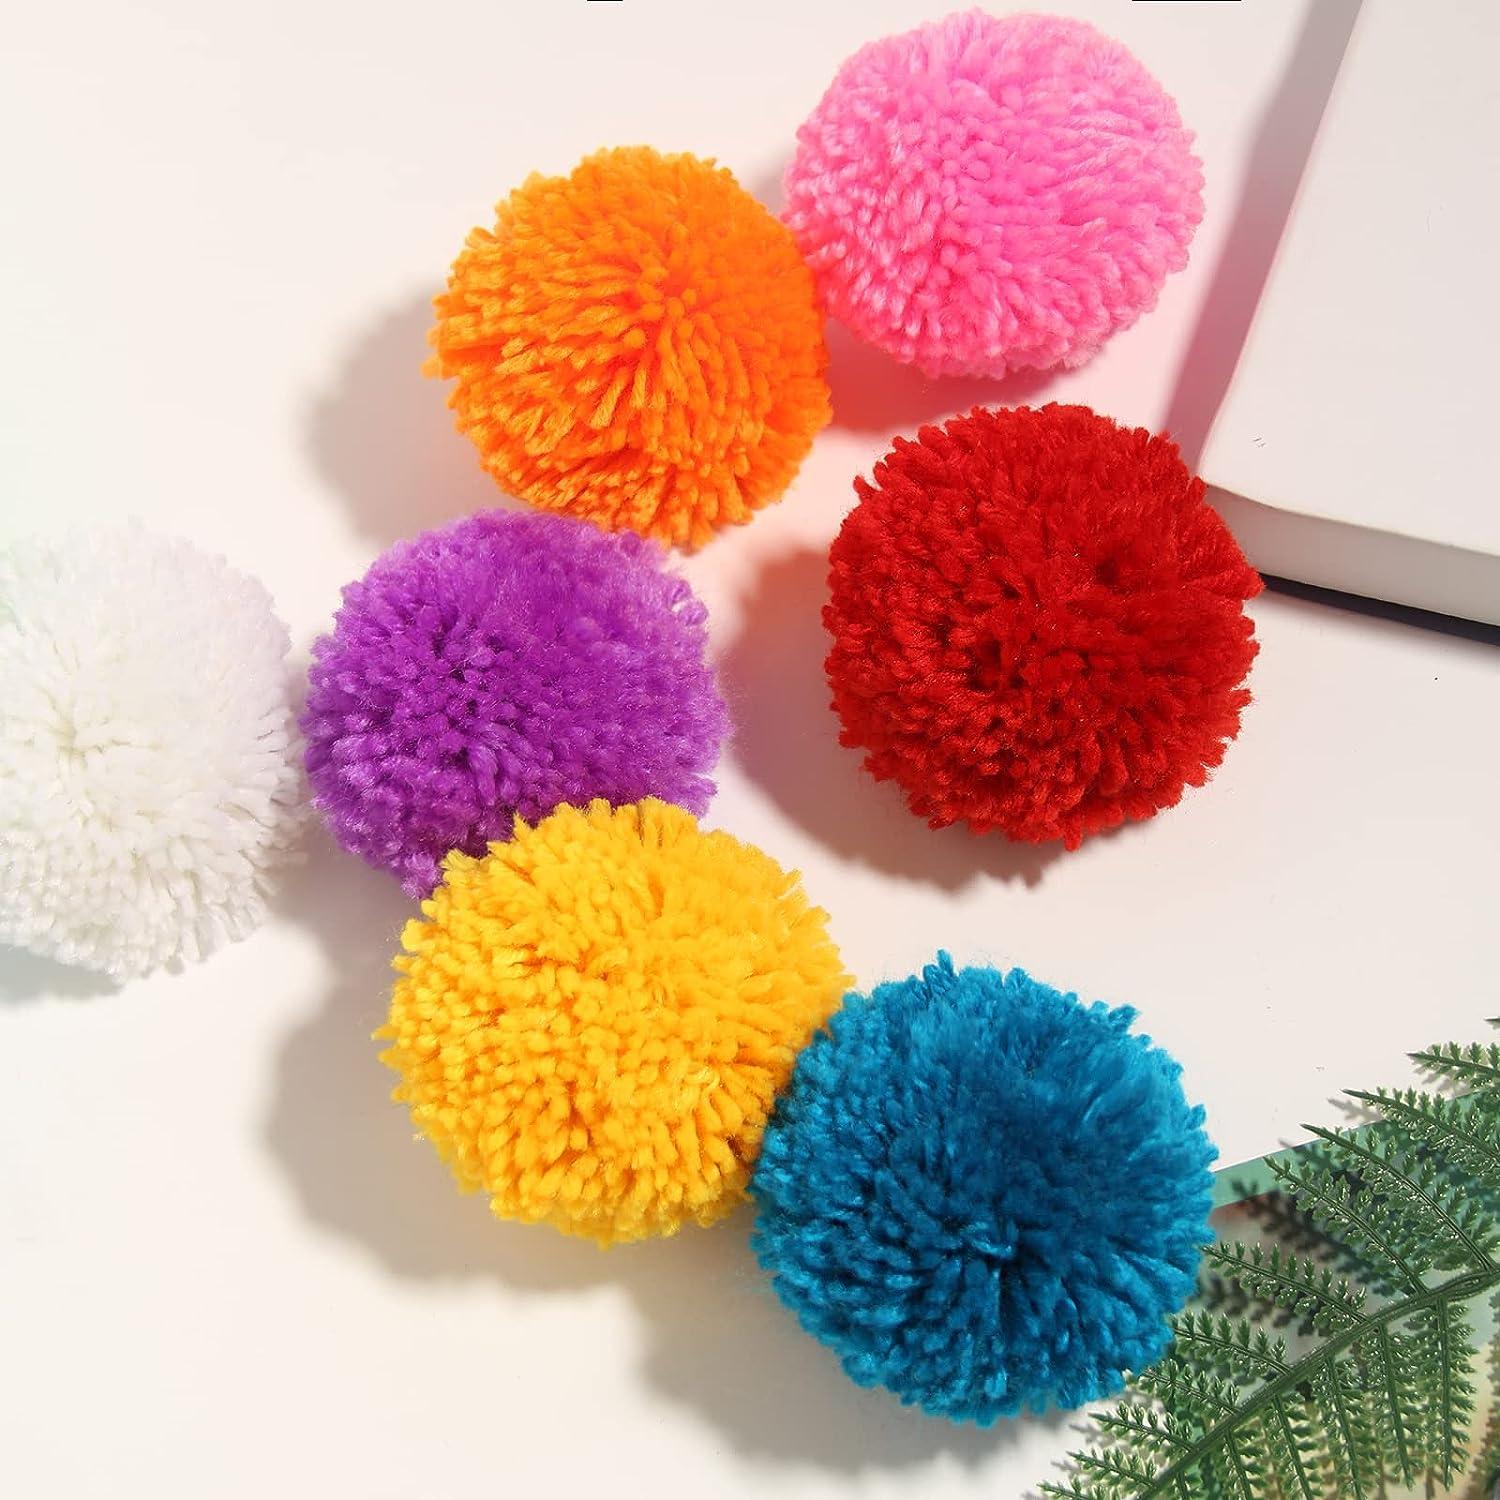 10 Pcs Large Yarn Pom Poms-3 Inch Made to Order Acrylic Yarn Balls for Hats  Or Party Decorations-DIY Craft Pompoms (Mixed 3inch) Mixed 3inch